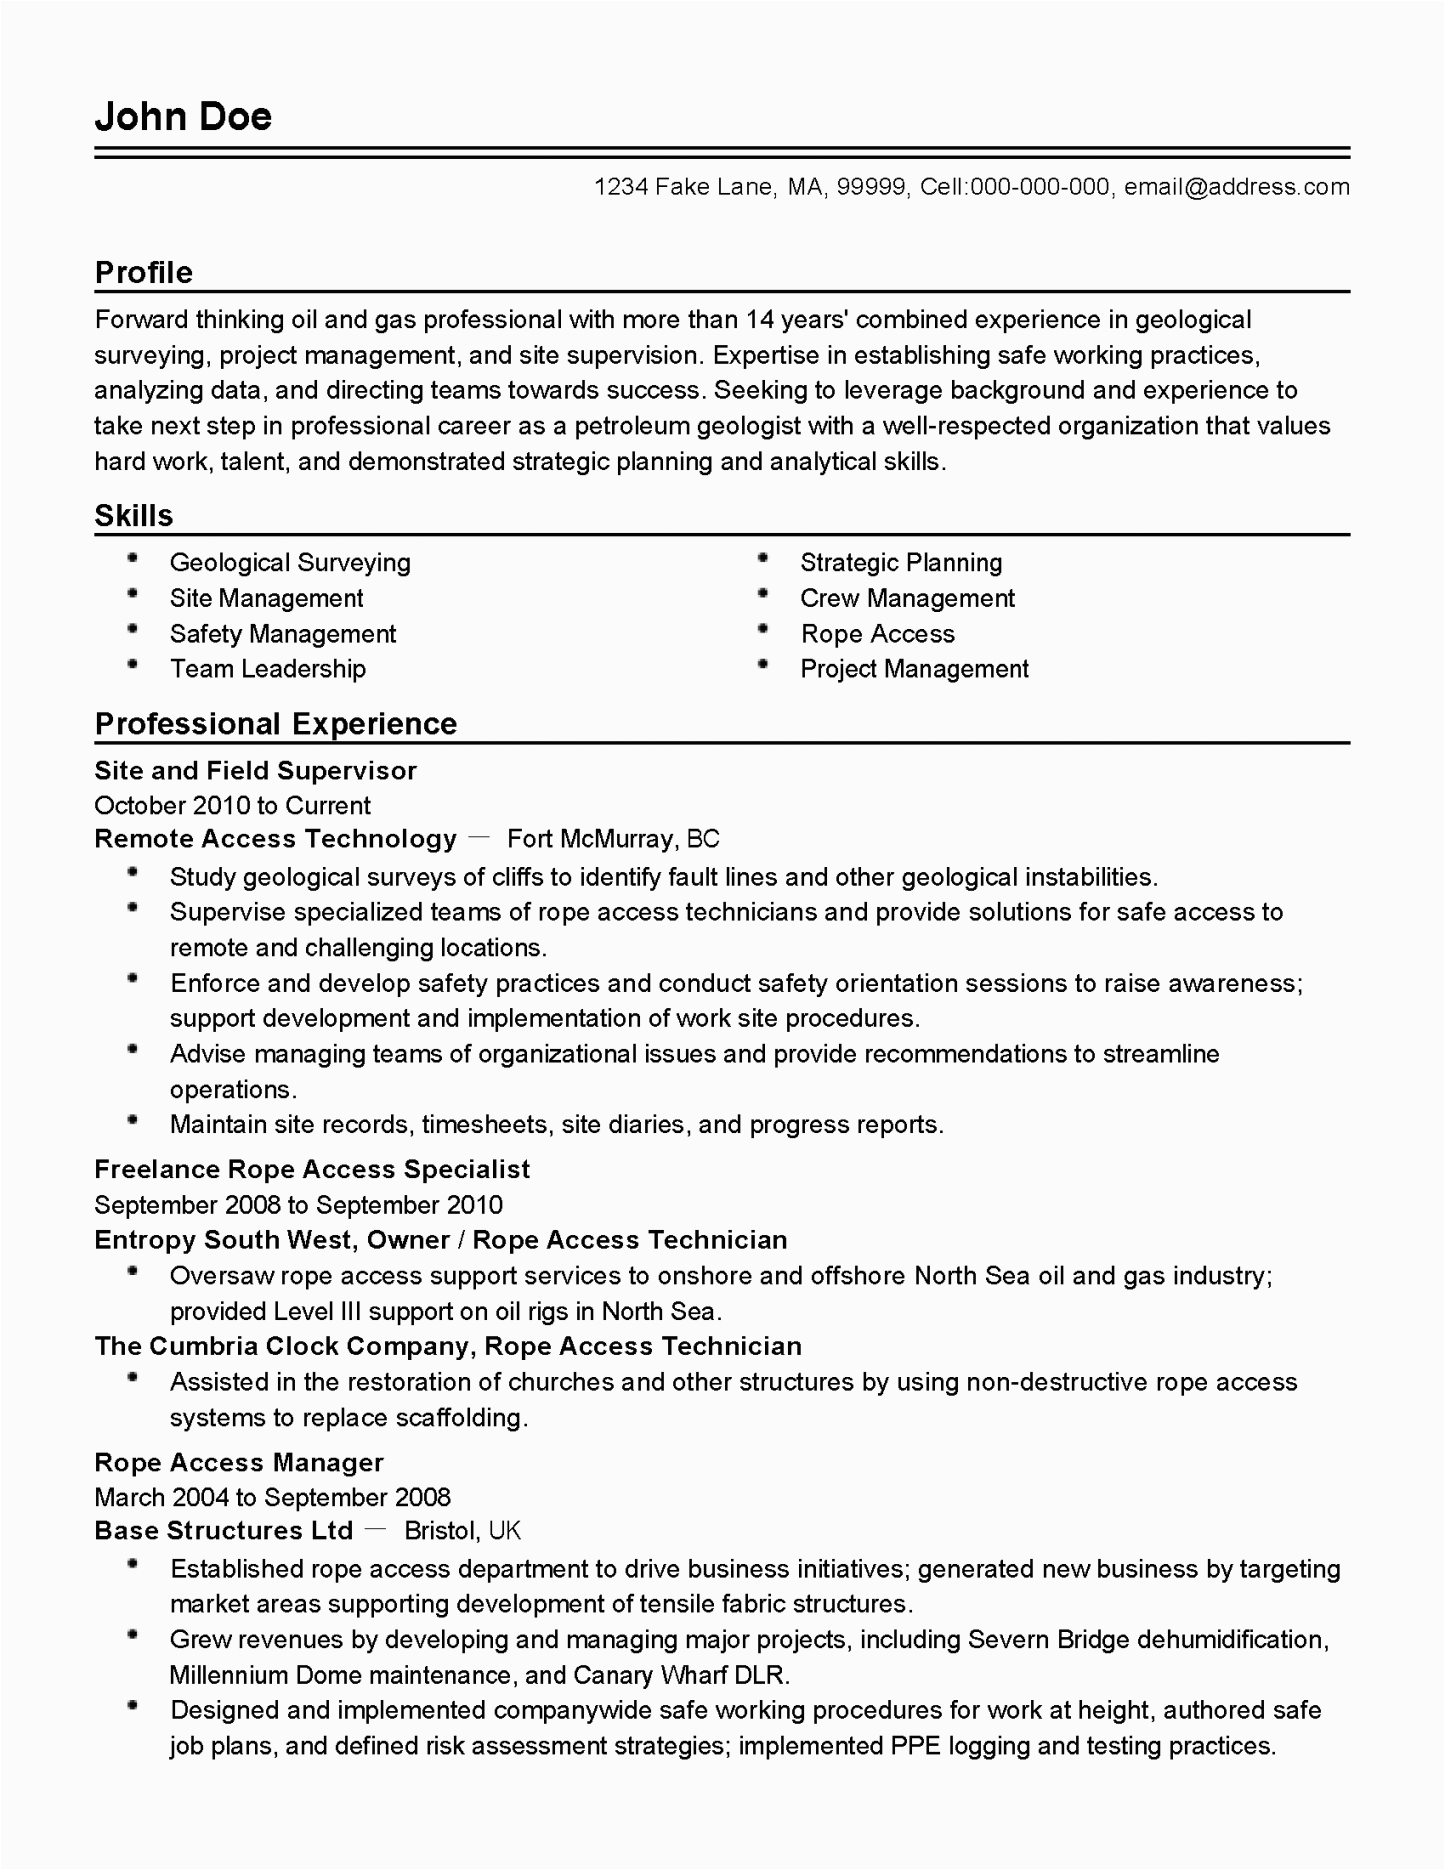 Resume Templates for Oil and Gas Industry Oil and Gas Resume Examples